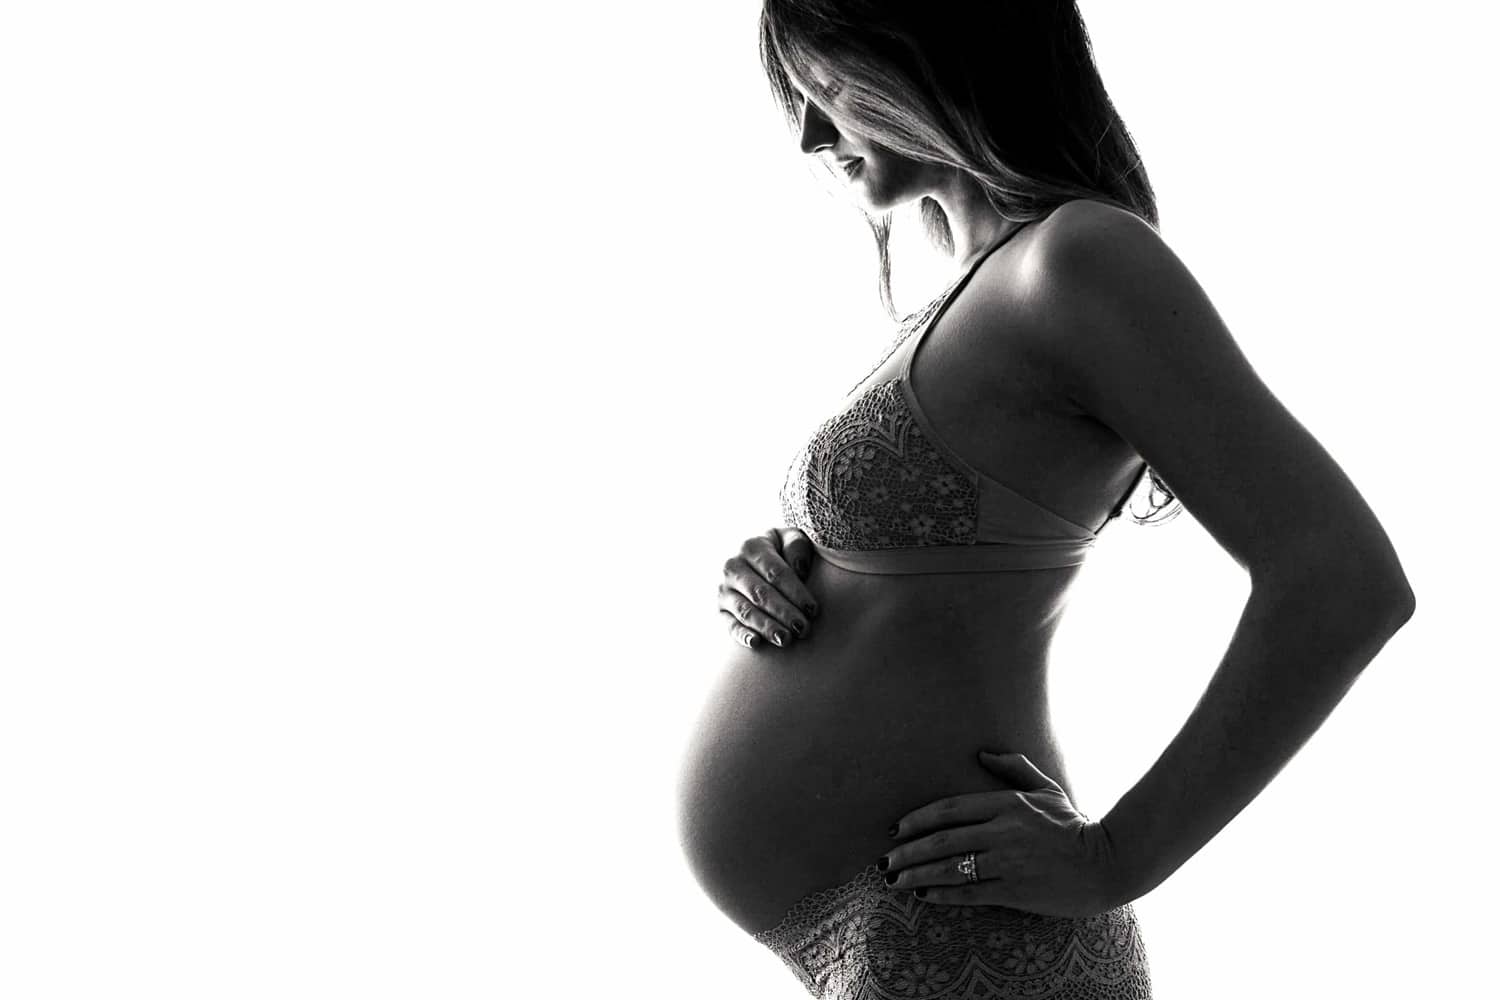 A black & white maternity photo of a woman in lace.